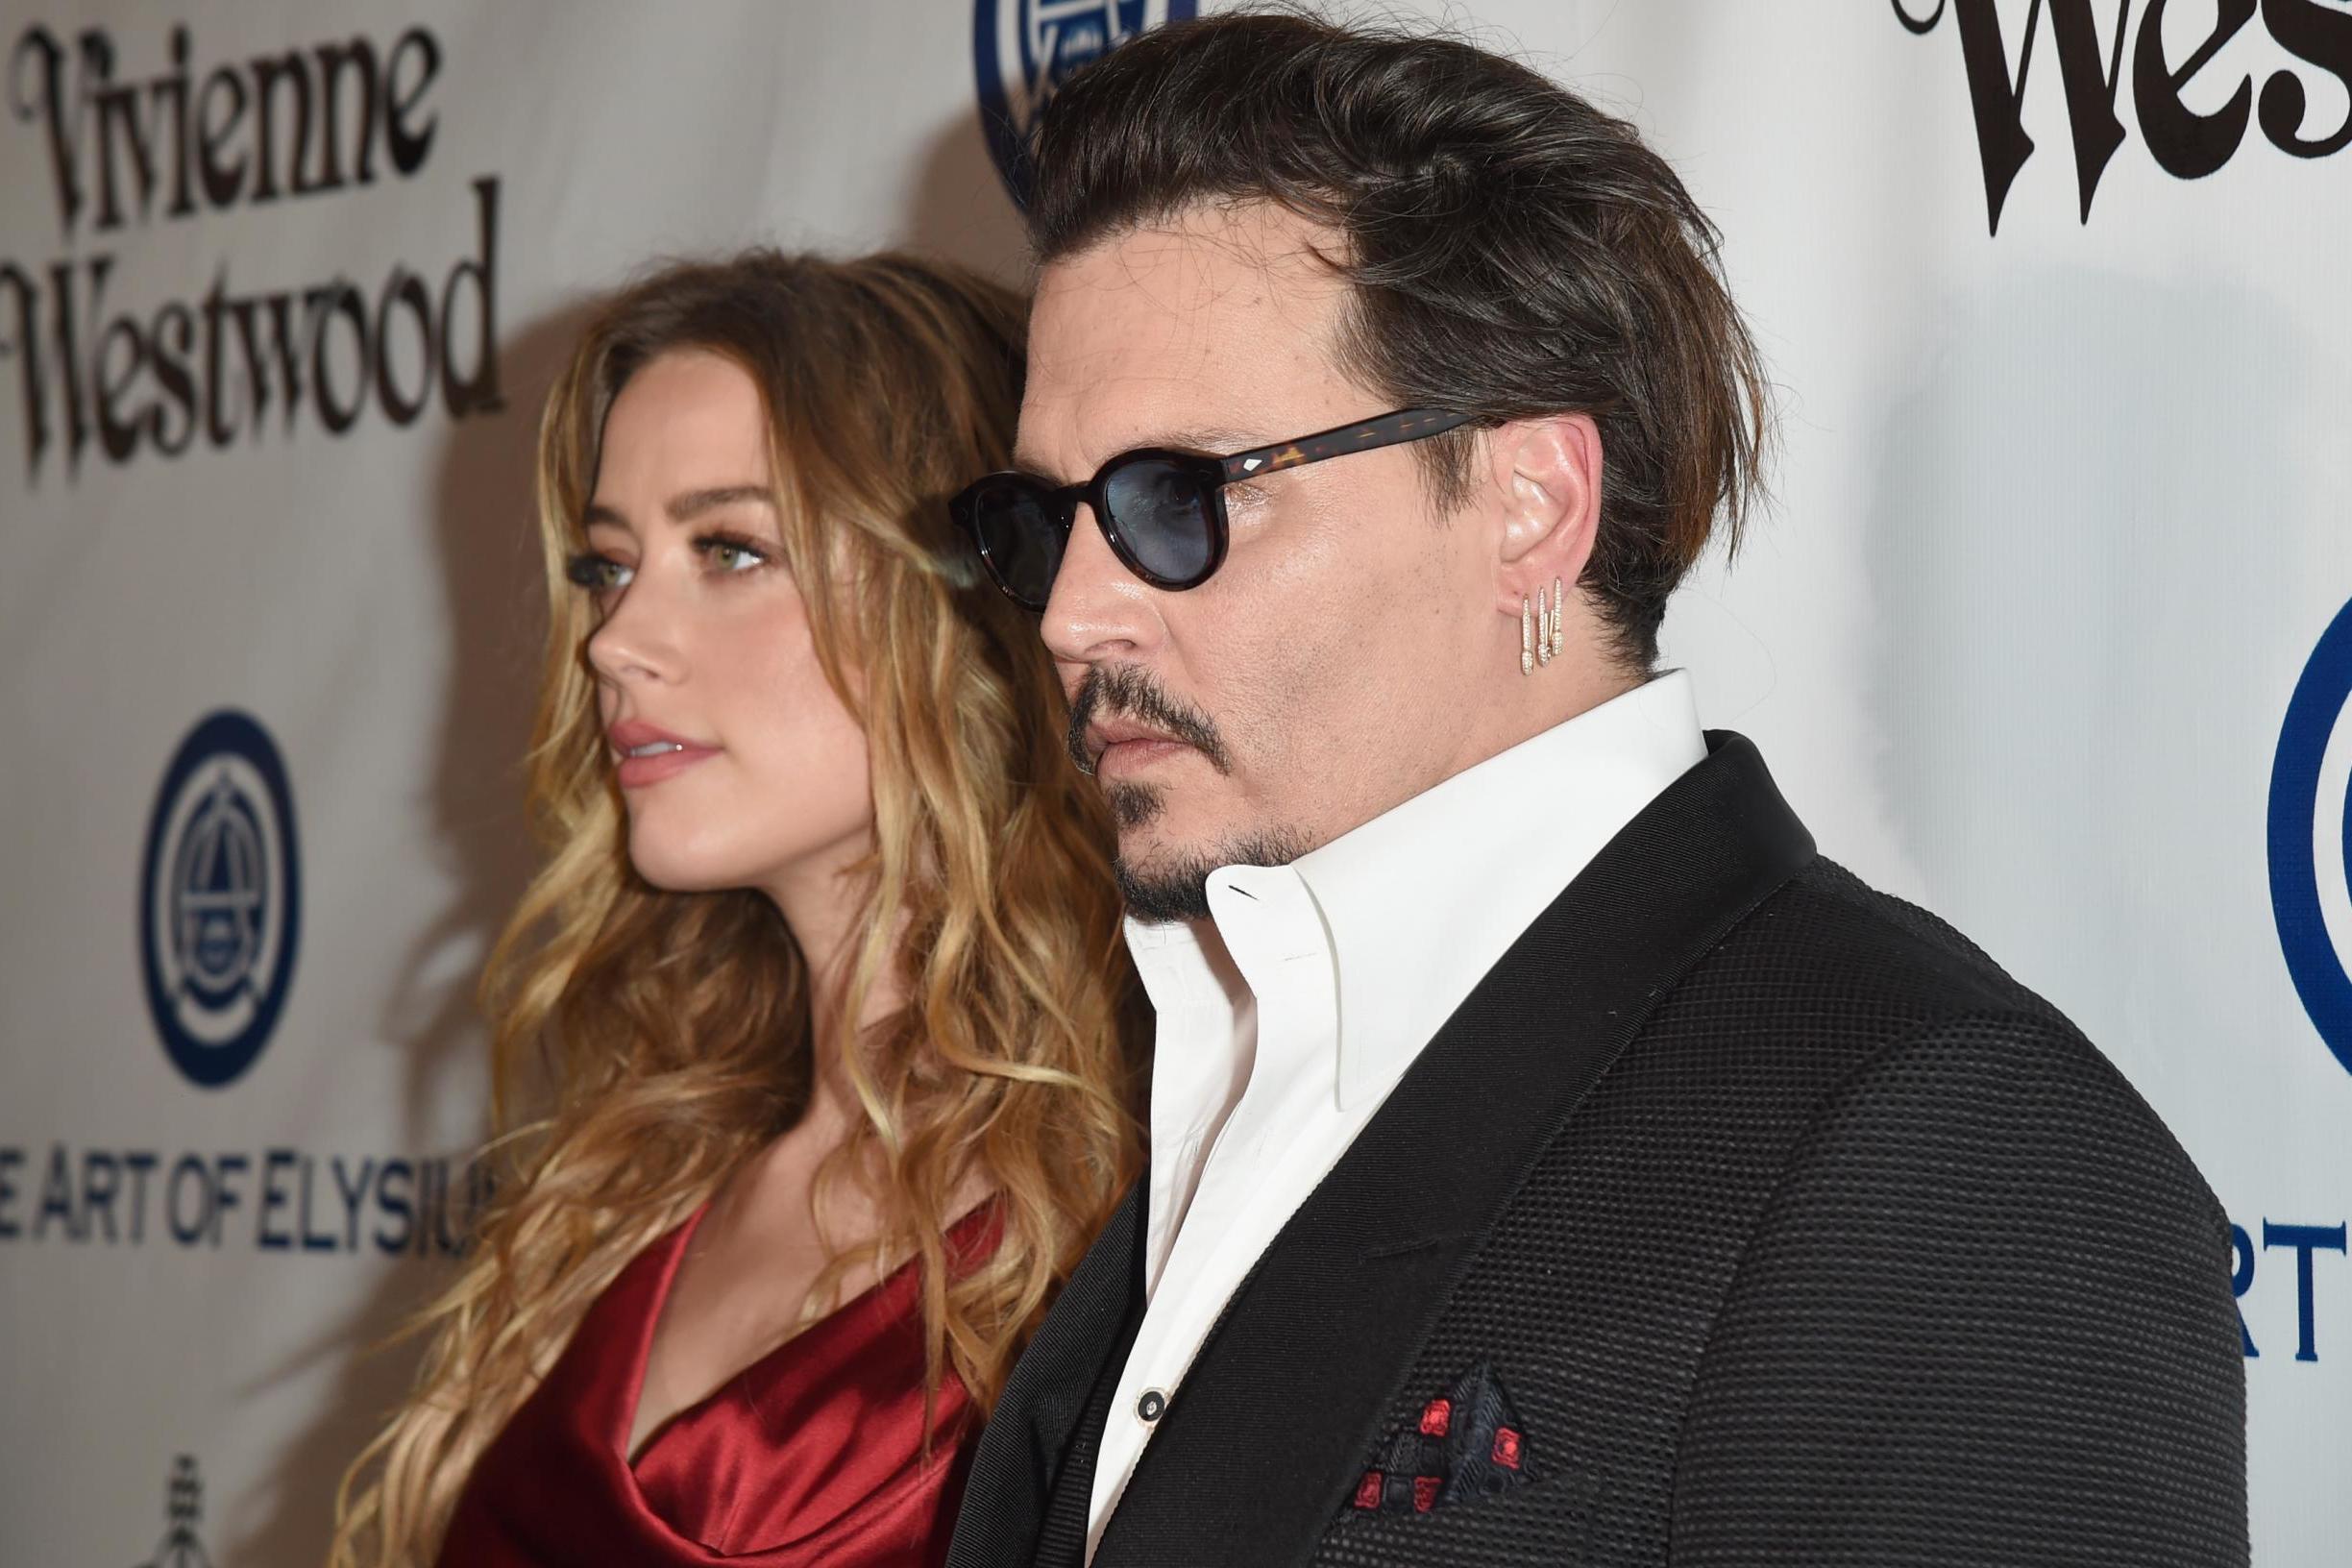 Actors Amber Heard and Johnny Depp attend The Art of Elysium 2016 HEAVEN Gala presented by Vivienne Westwood & Andreas Kronthaler at 3LABS on 9 January, 2016 in Culver City, California.